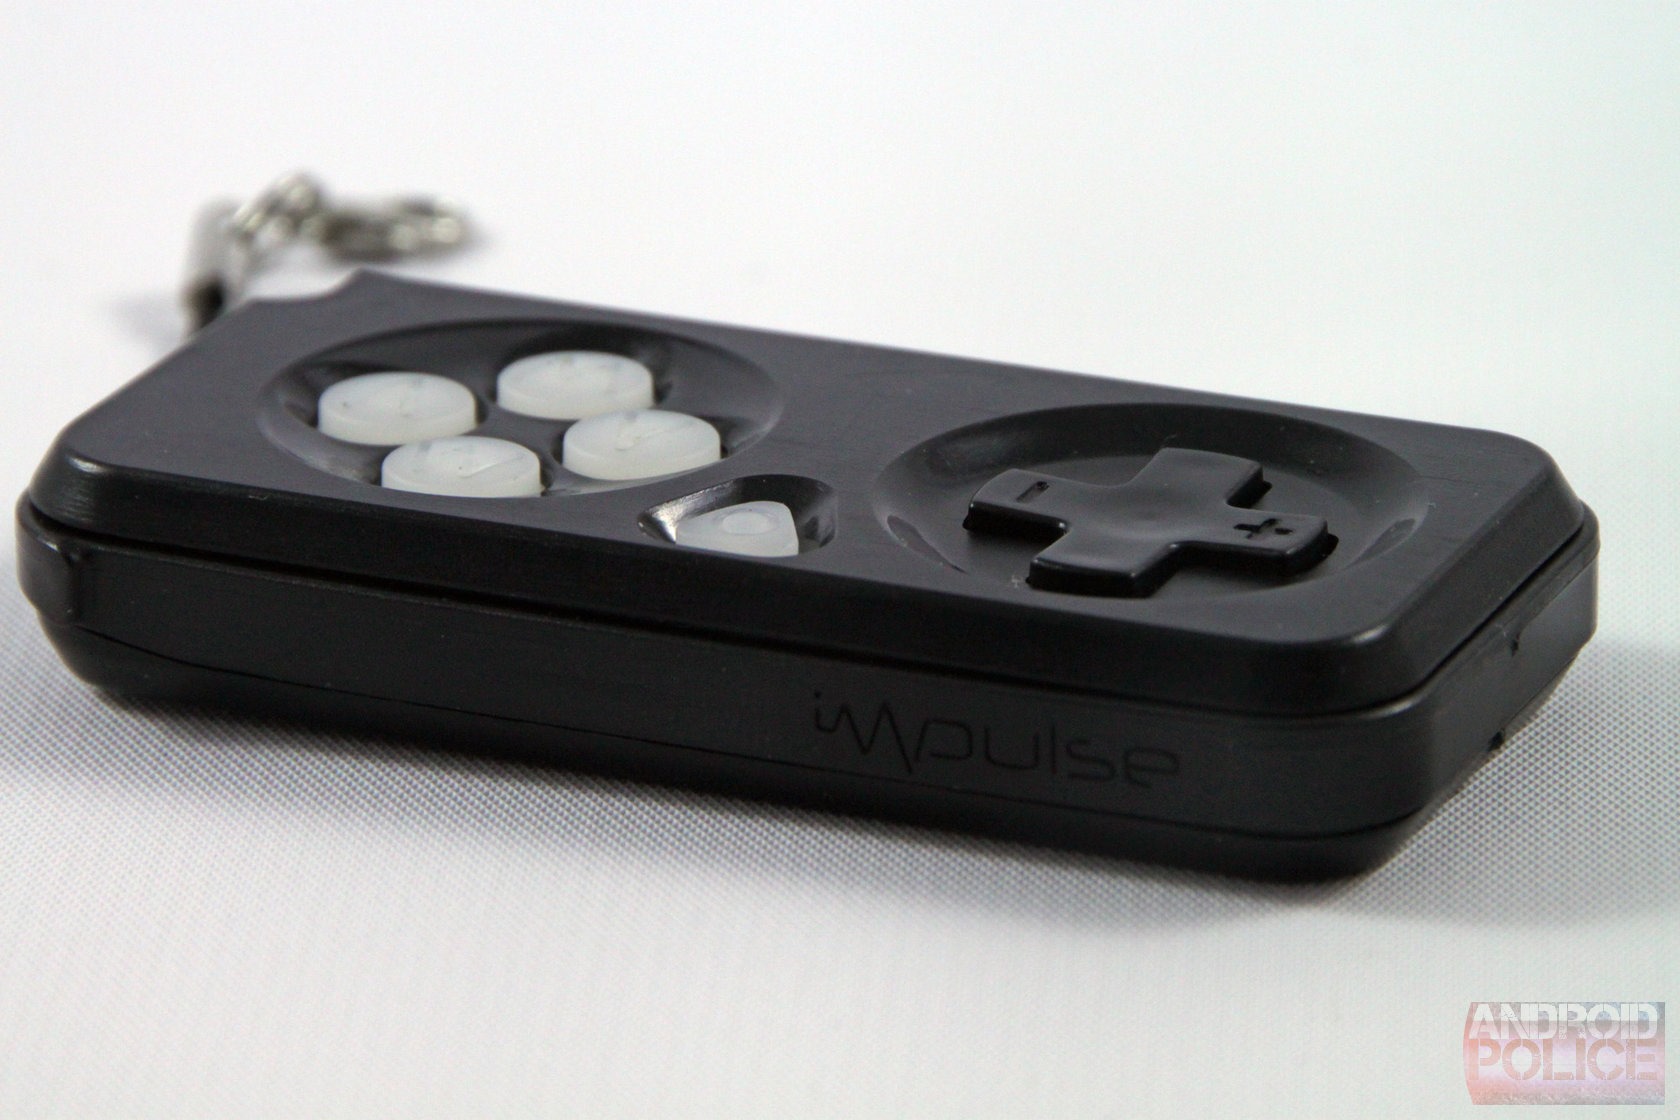 Impulse: a tiny, yet accurate, gaming controller